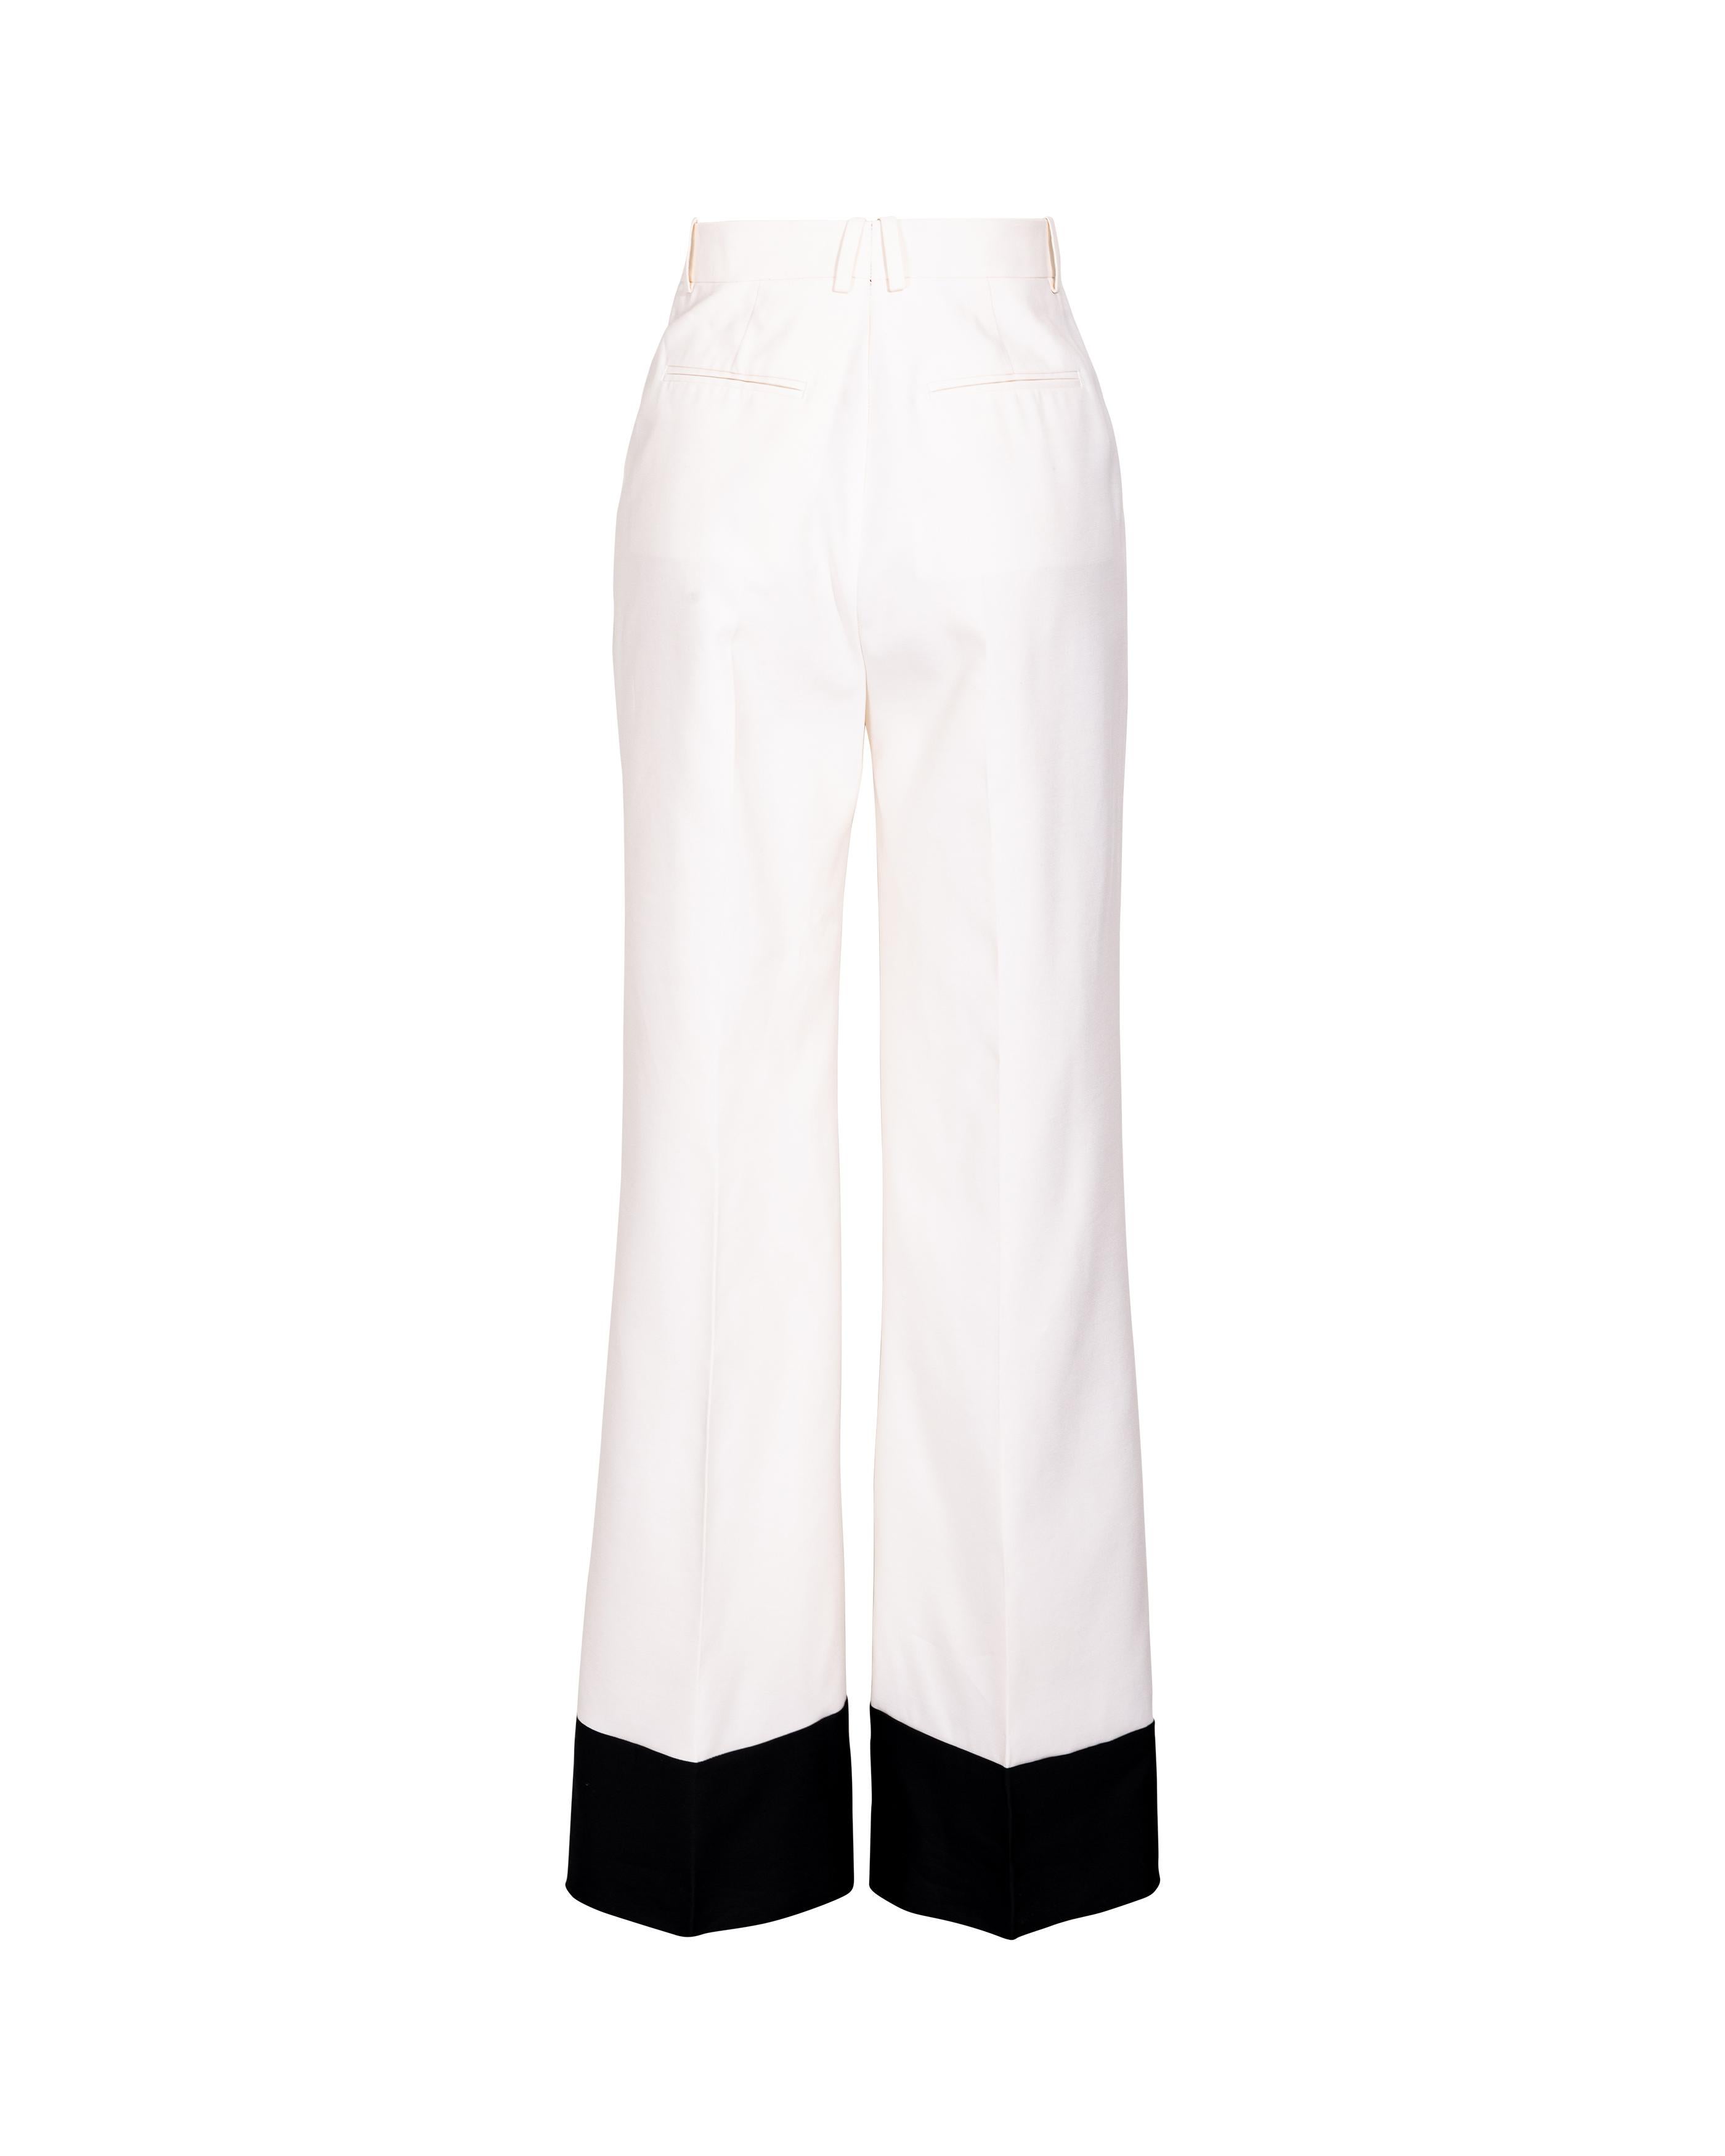 Women's Resort 2013 Old C�éline by Phoebe Philo White and Black Color Block Trousers